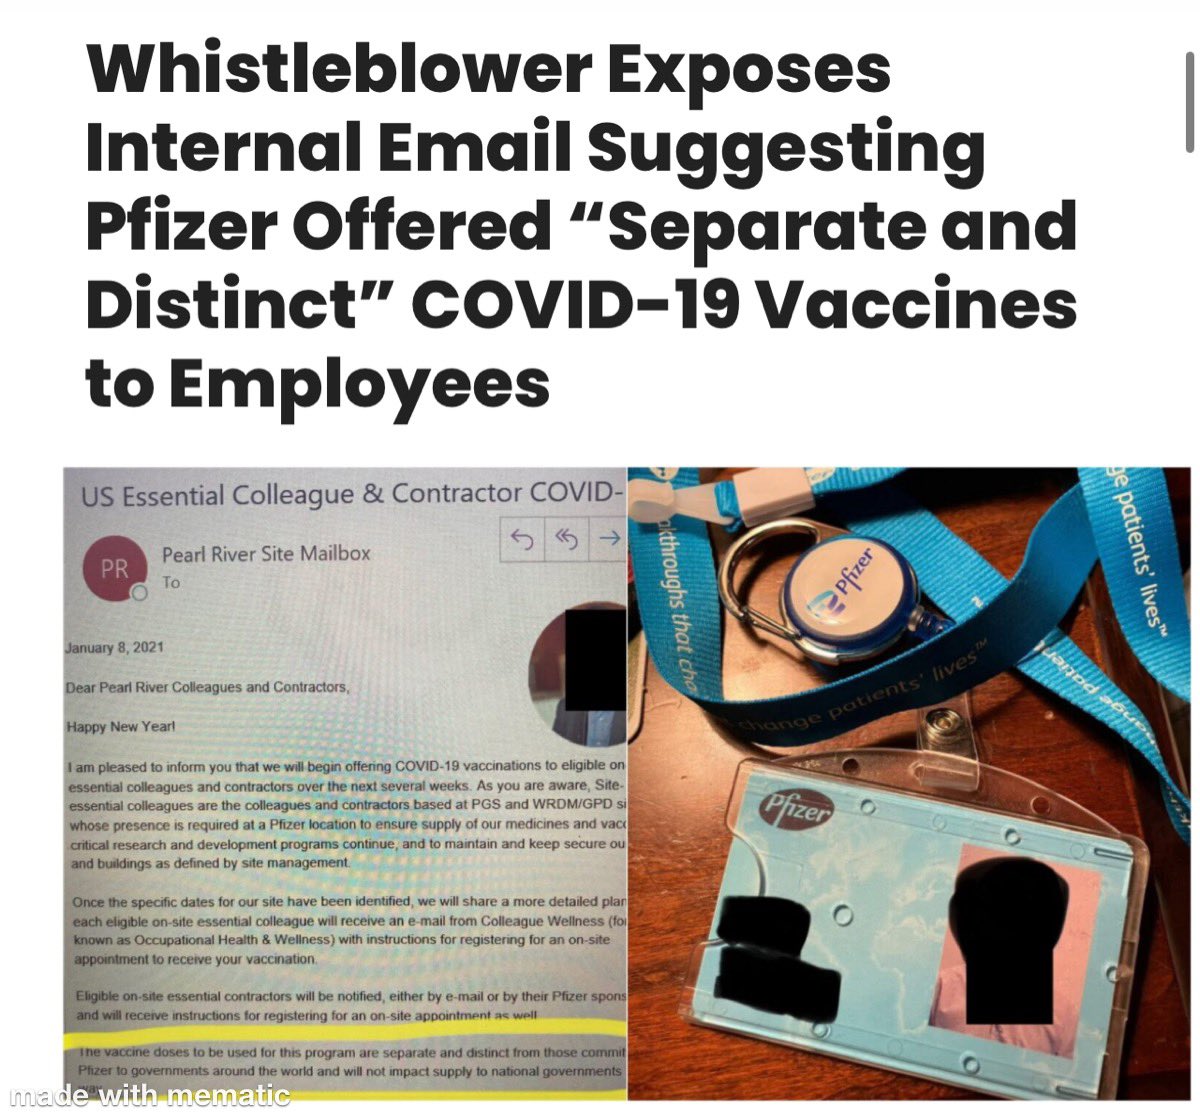 The truth is coming out- and it seems to be exactly as we all suspected: 

A whistleblower from Pfizer has leaked an internal email indicating that the pharmaceutical giant offered a “separate and distinct” COVID-19 vaccine to employees at its Pearl River research site in…